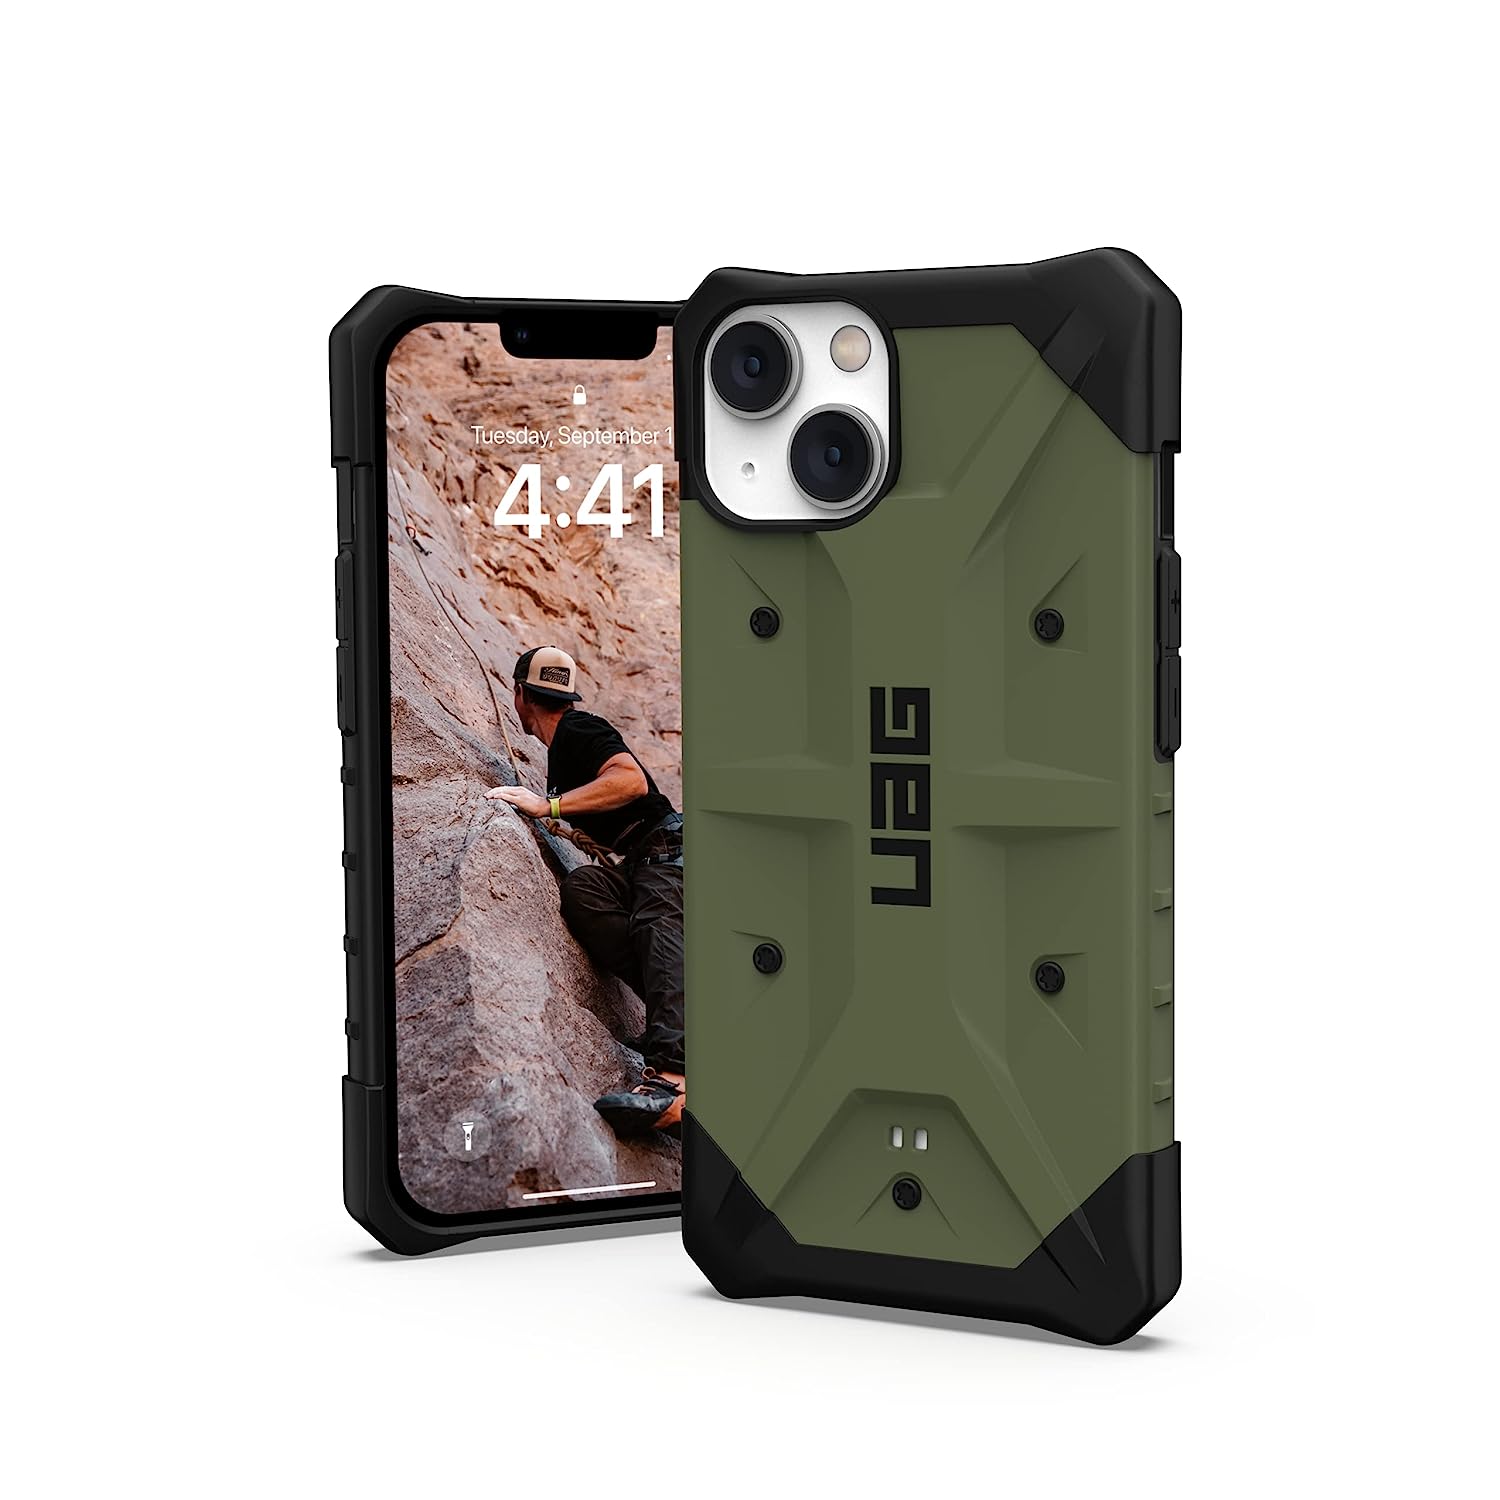 iPhone 12 Armor Cover | Original Urban Armor Slim Fit Rugged Protective Case/Cover Designed For Apple iPhone 12 UAG Olive